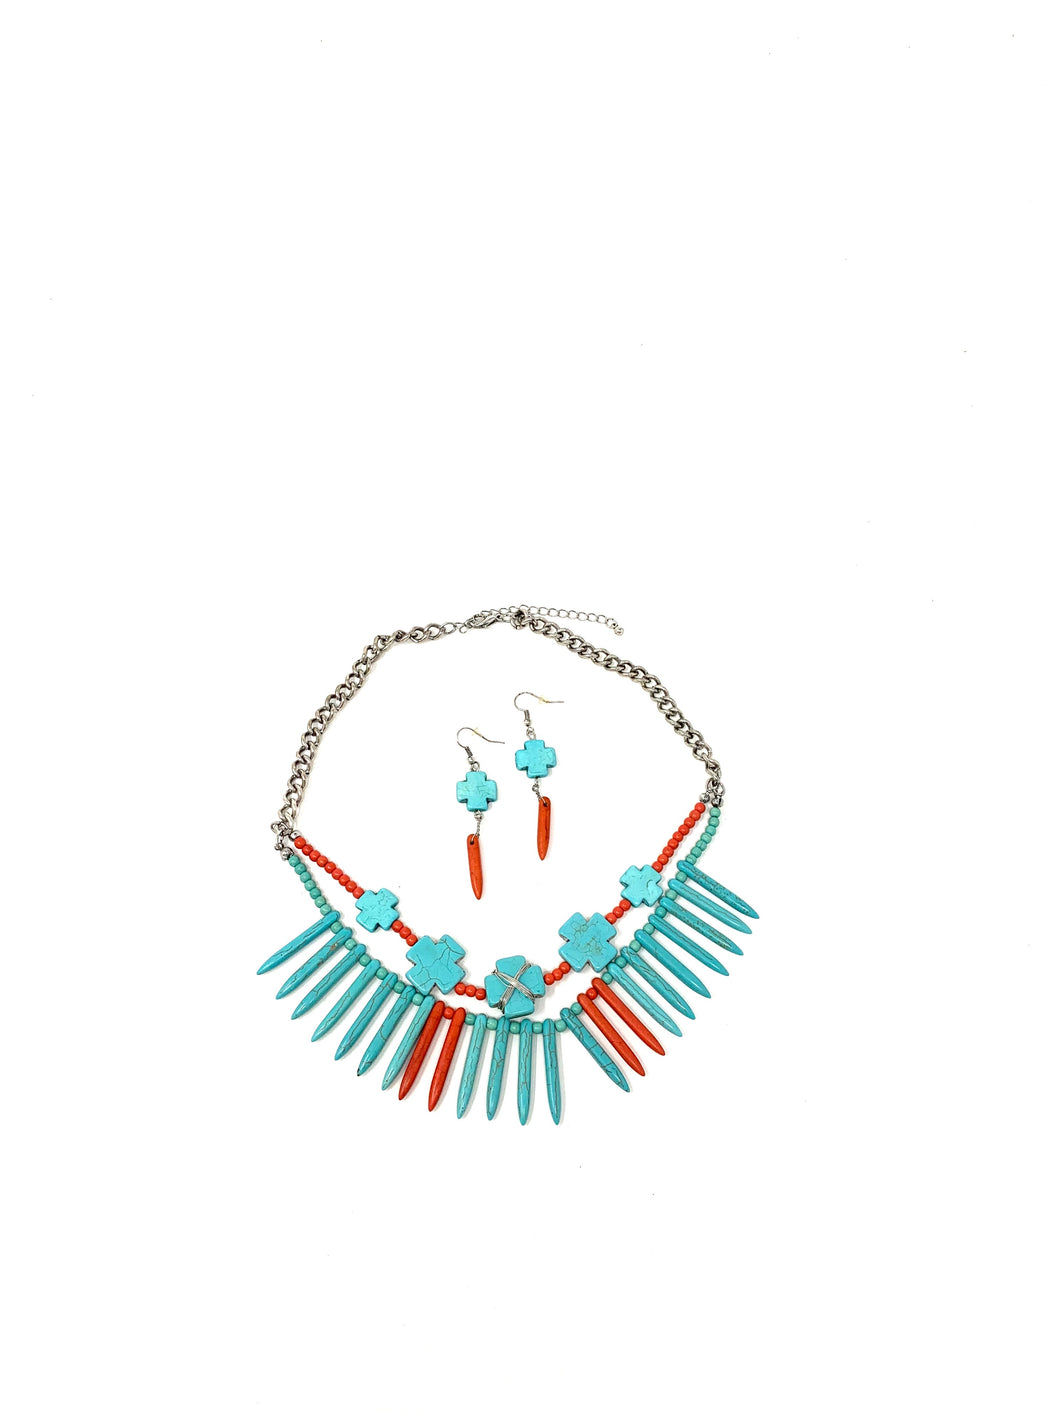 Tribal Huntress Necklace and Earring Set